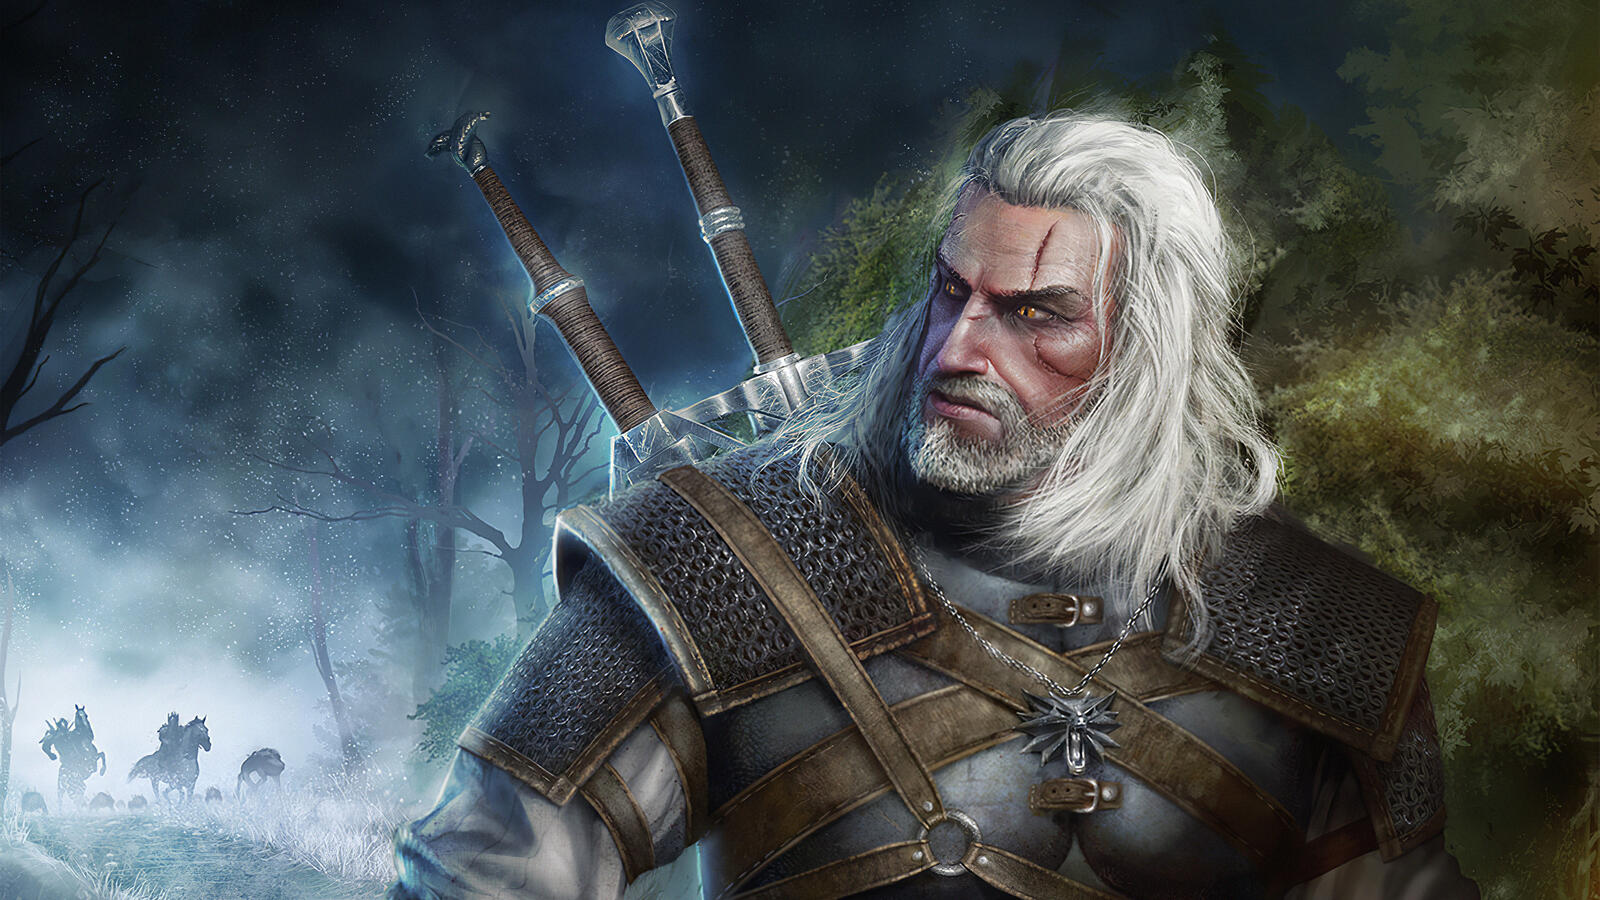 Wallpapers The Witcher 3 games rendering on the desktop